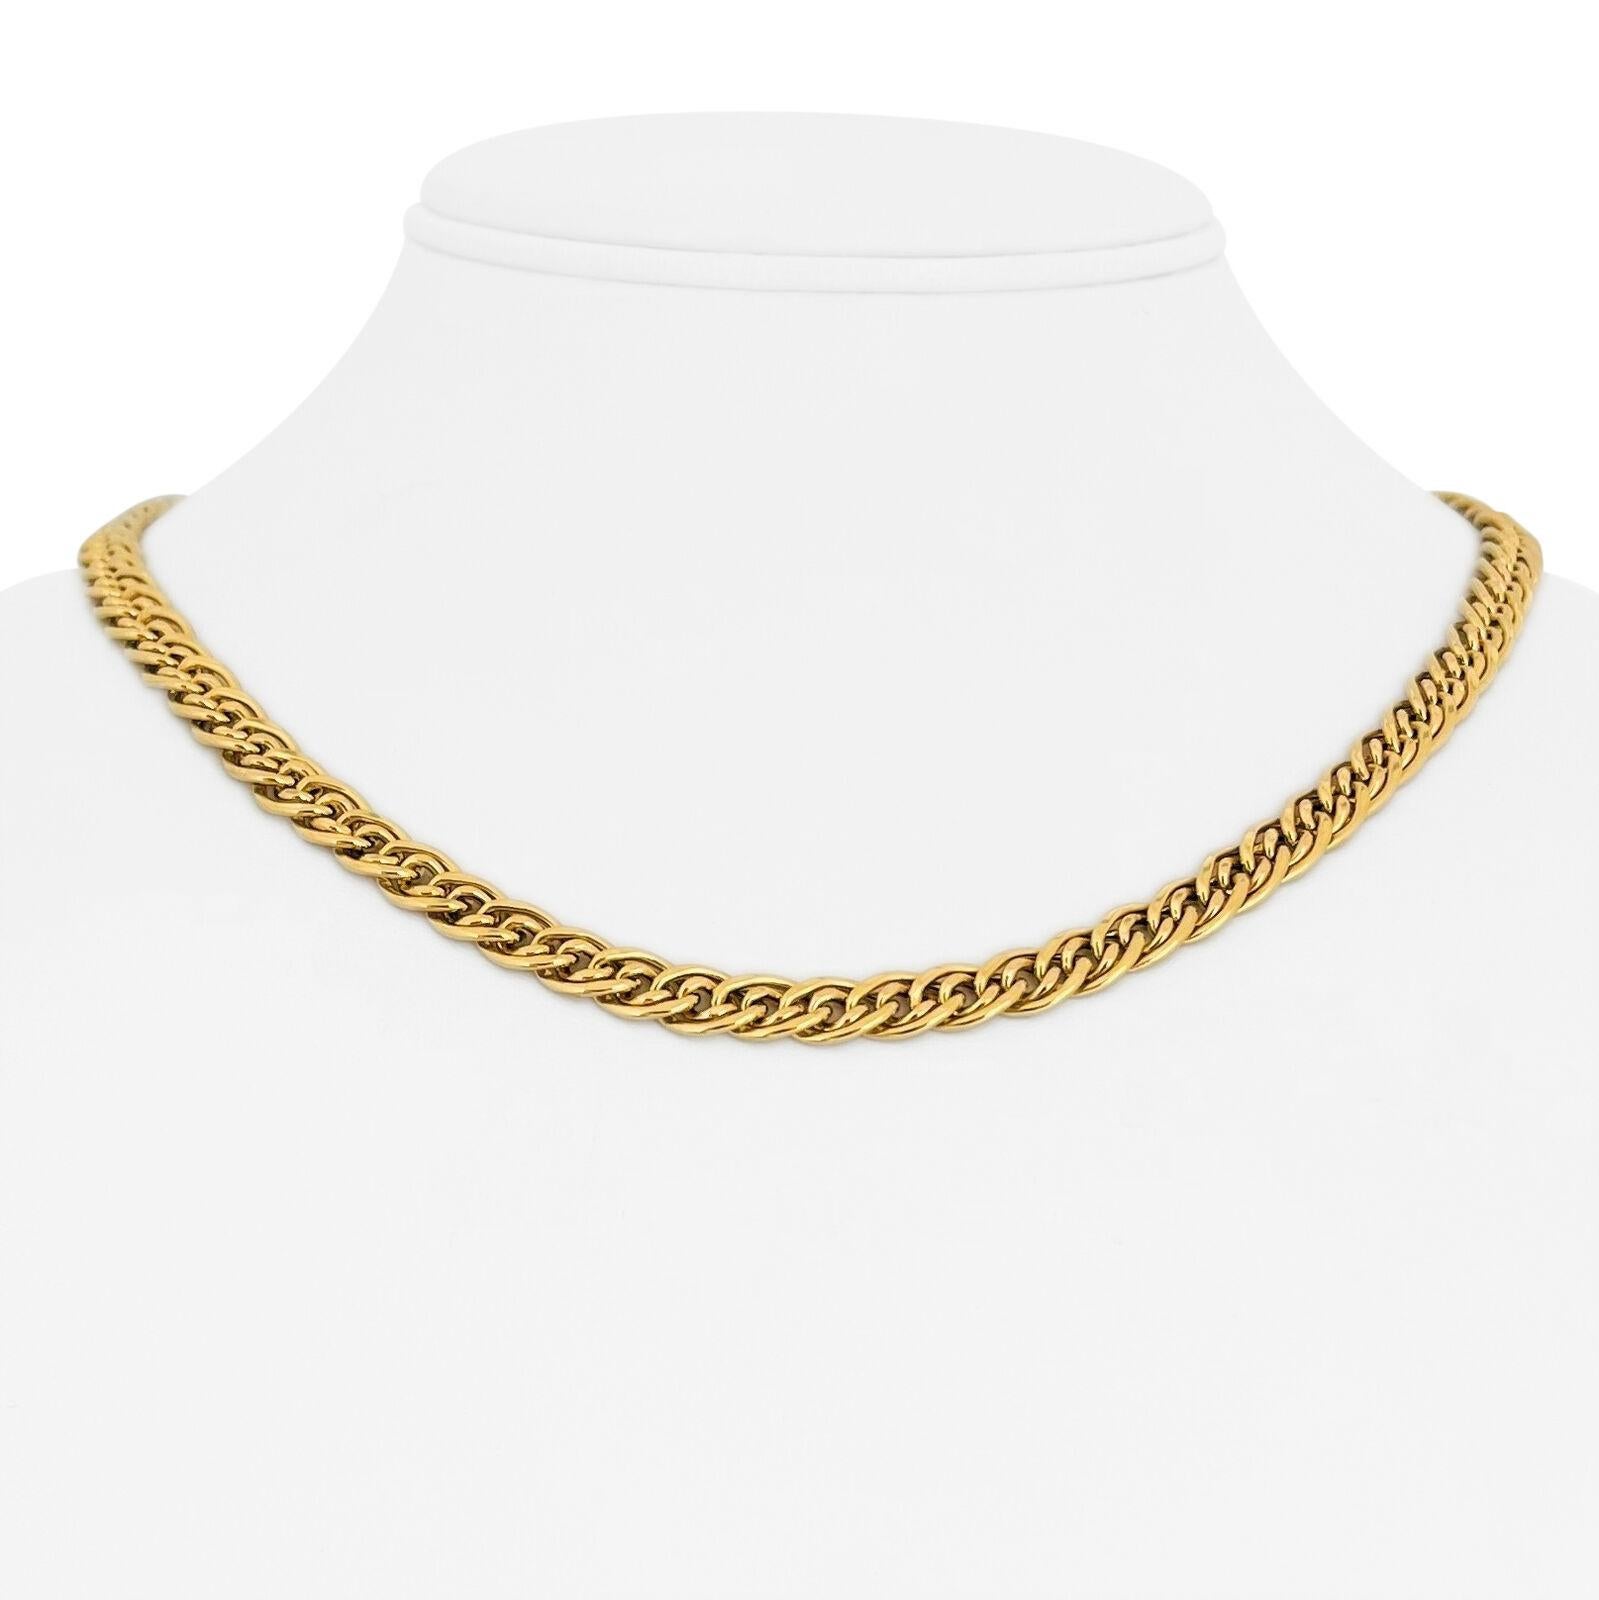 18 Karat Yellow Gold Ladies Fancy Curb Link Chain Necklace Italy 4